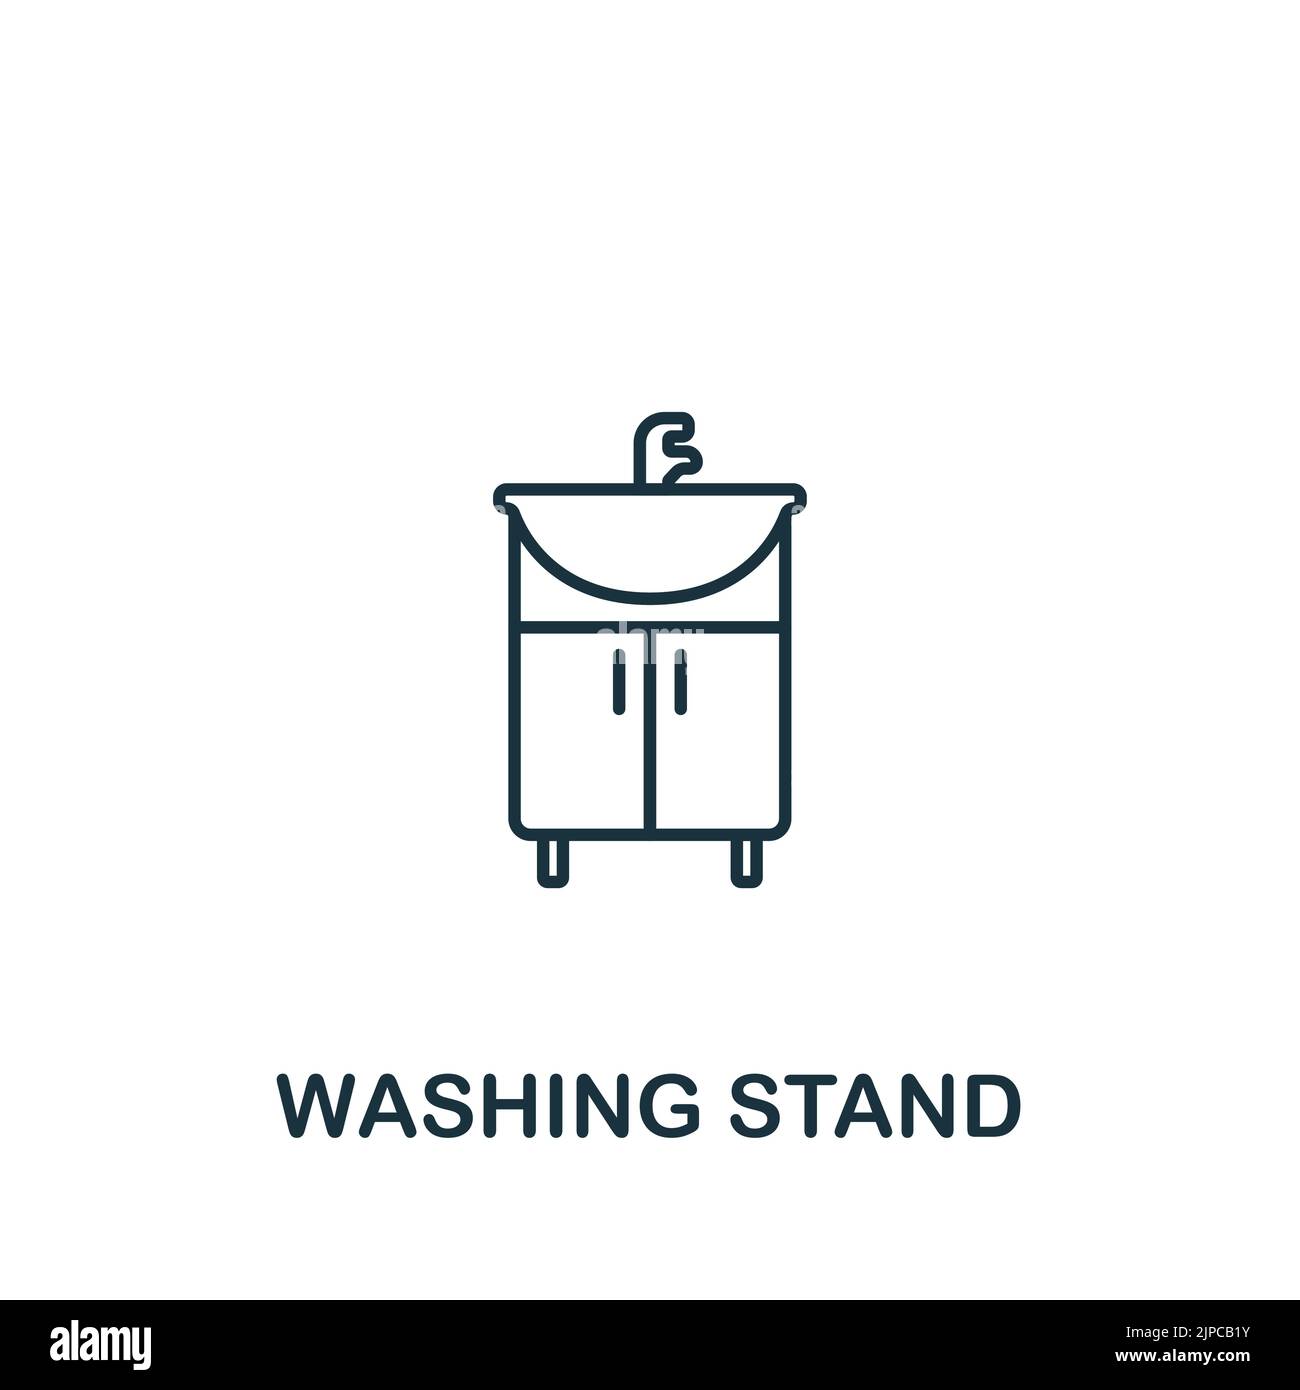 Washing Stand icon. Line simple Interior Furniture icon for templates, web design and infographics Stock Vector